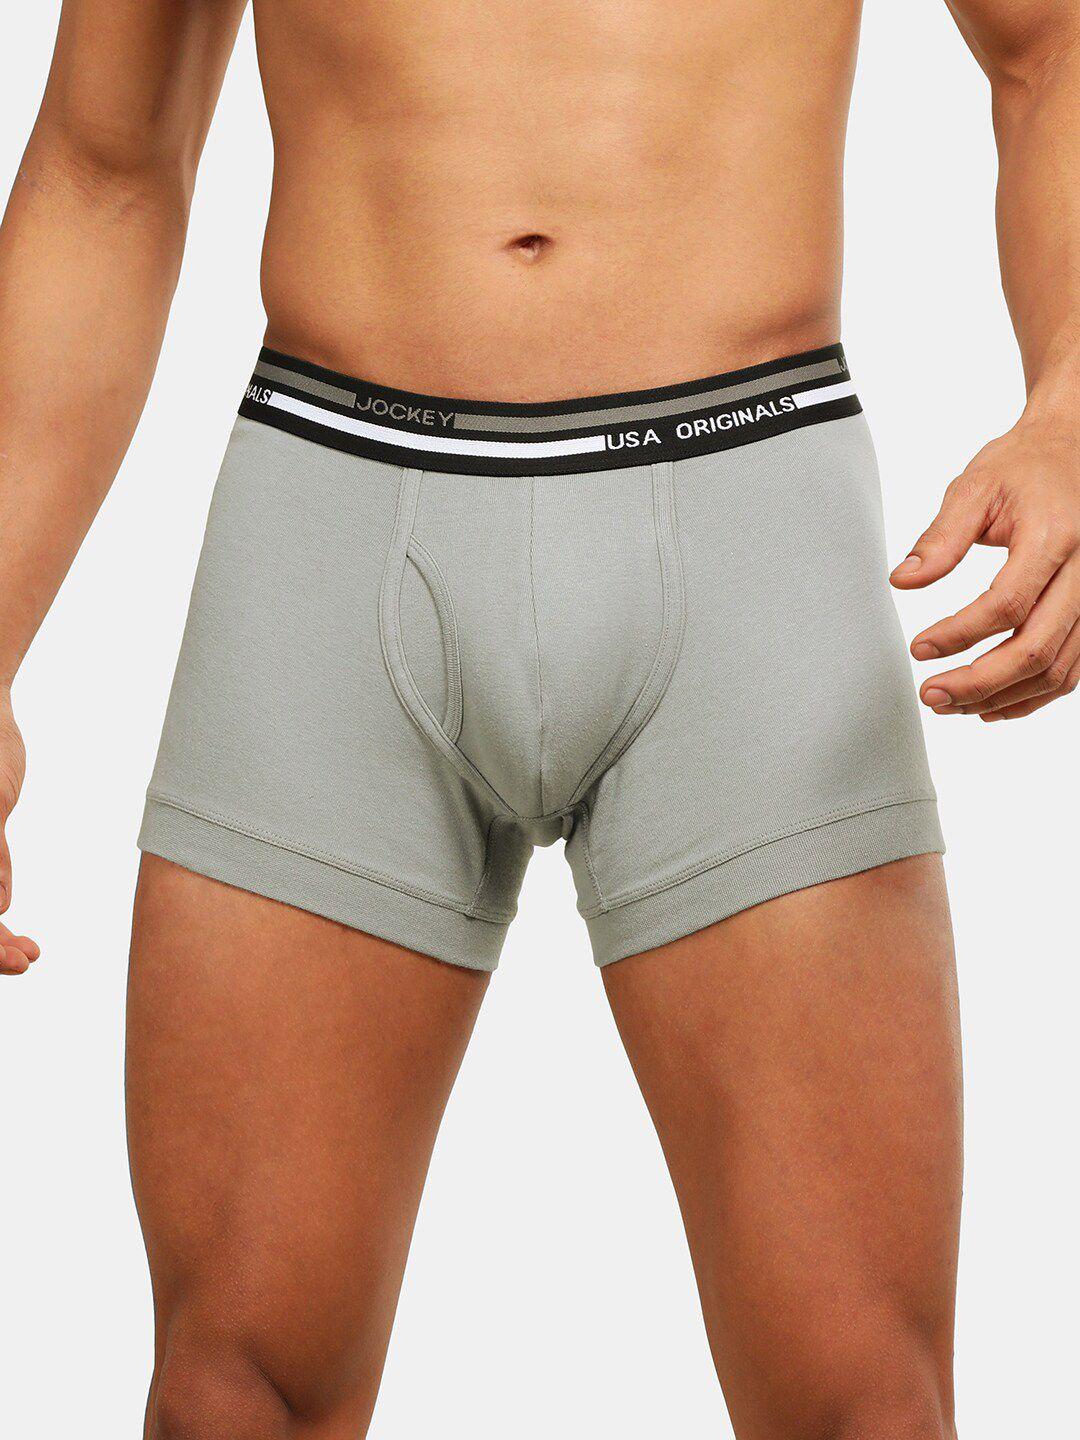 jockey men super combed cotton trunk with ultrasoft and durable waistband ui22-0105-mnumt